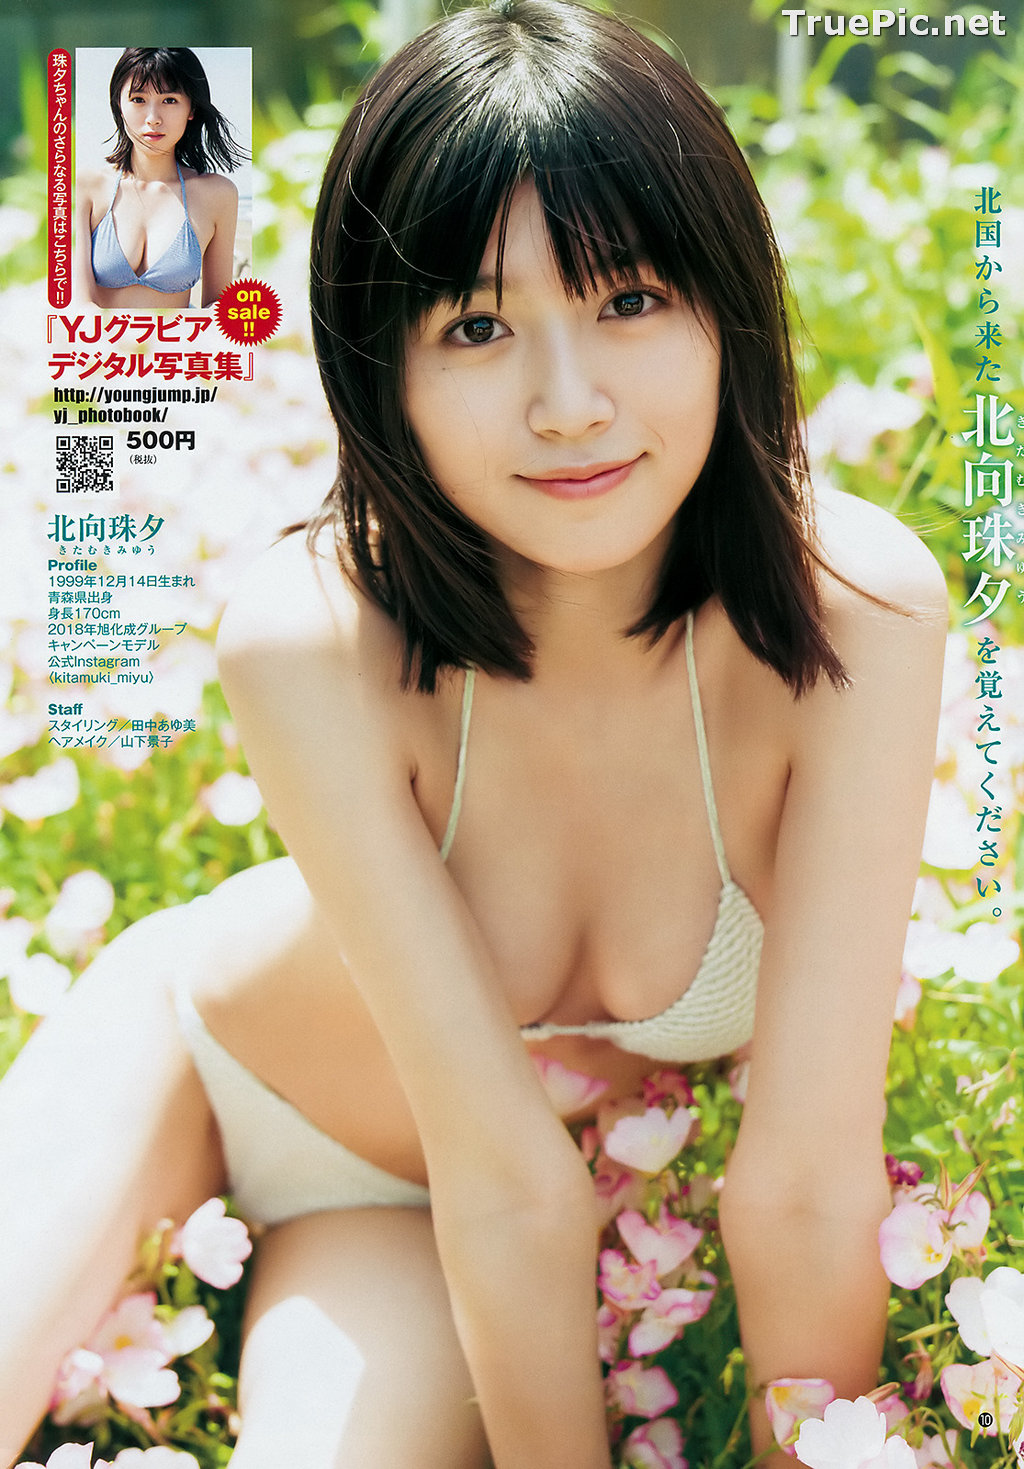 ImageJapanese Gravure Idol and Actress - Kitamuki Miyu (北向珠夕) - Sexy Picture Collection 2020 - TruePic.net - Picture-151